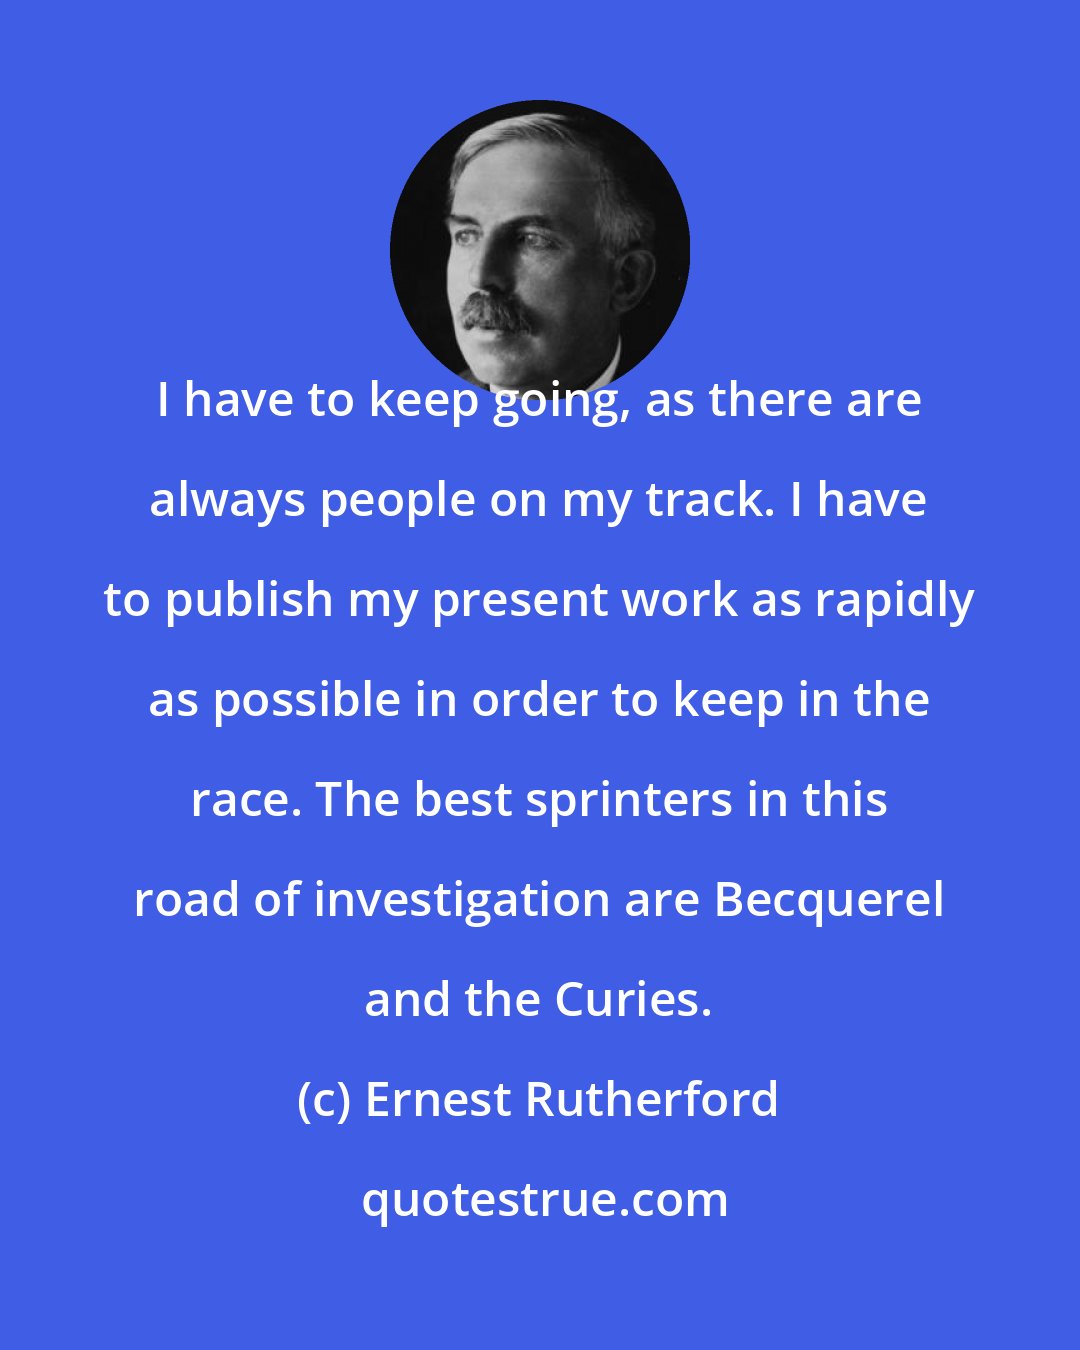 Ernest Rutherford: I have to keep going, as there are always people on my track. I have to publish my present work as rapidly as possible in order to keep in the race. The best sprinters in this road of investigation are Becquerel and the Curies.